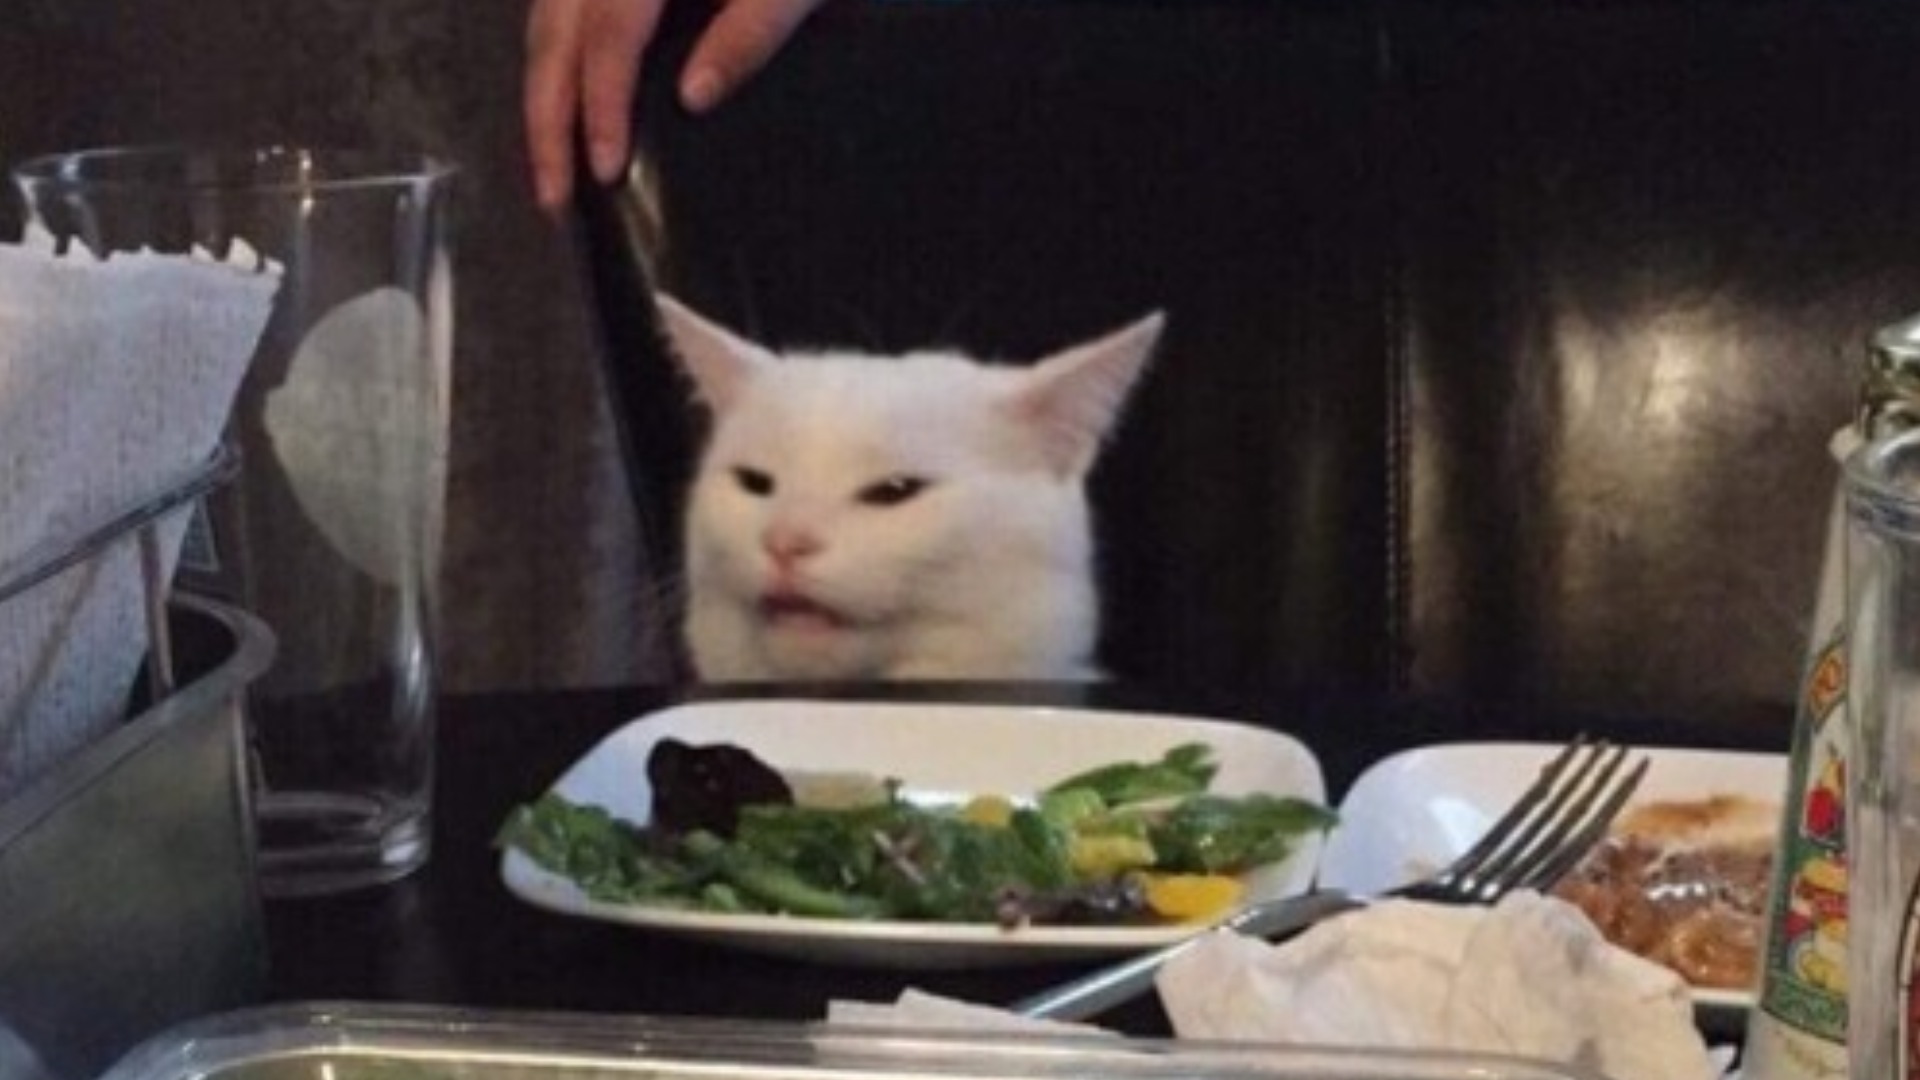 Woman yelling at cat meme: His name is Smudge, he's from Ottawa and he  hates salad | CTV News